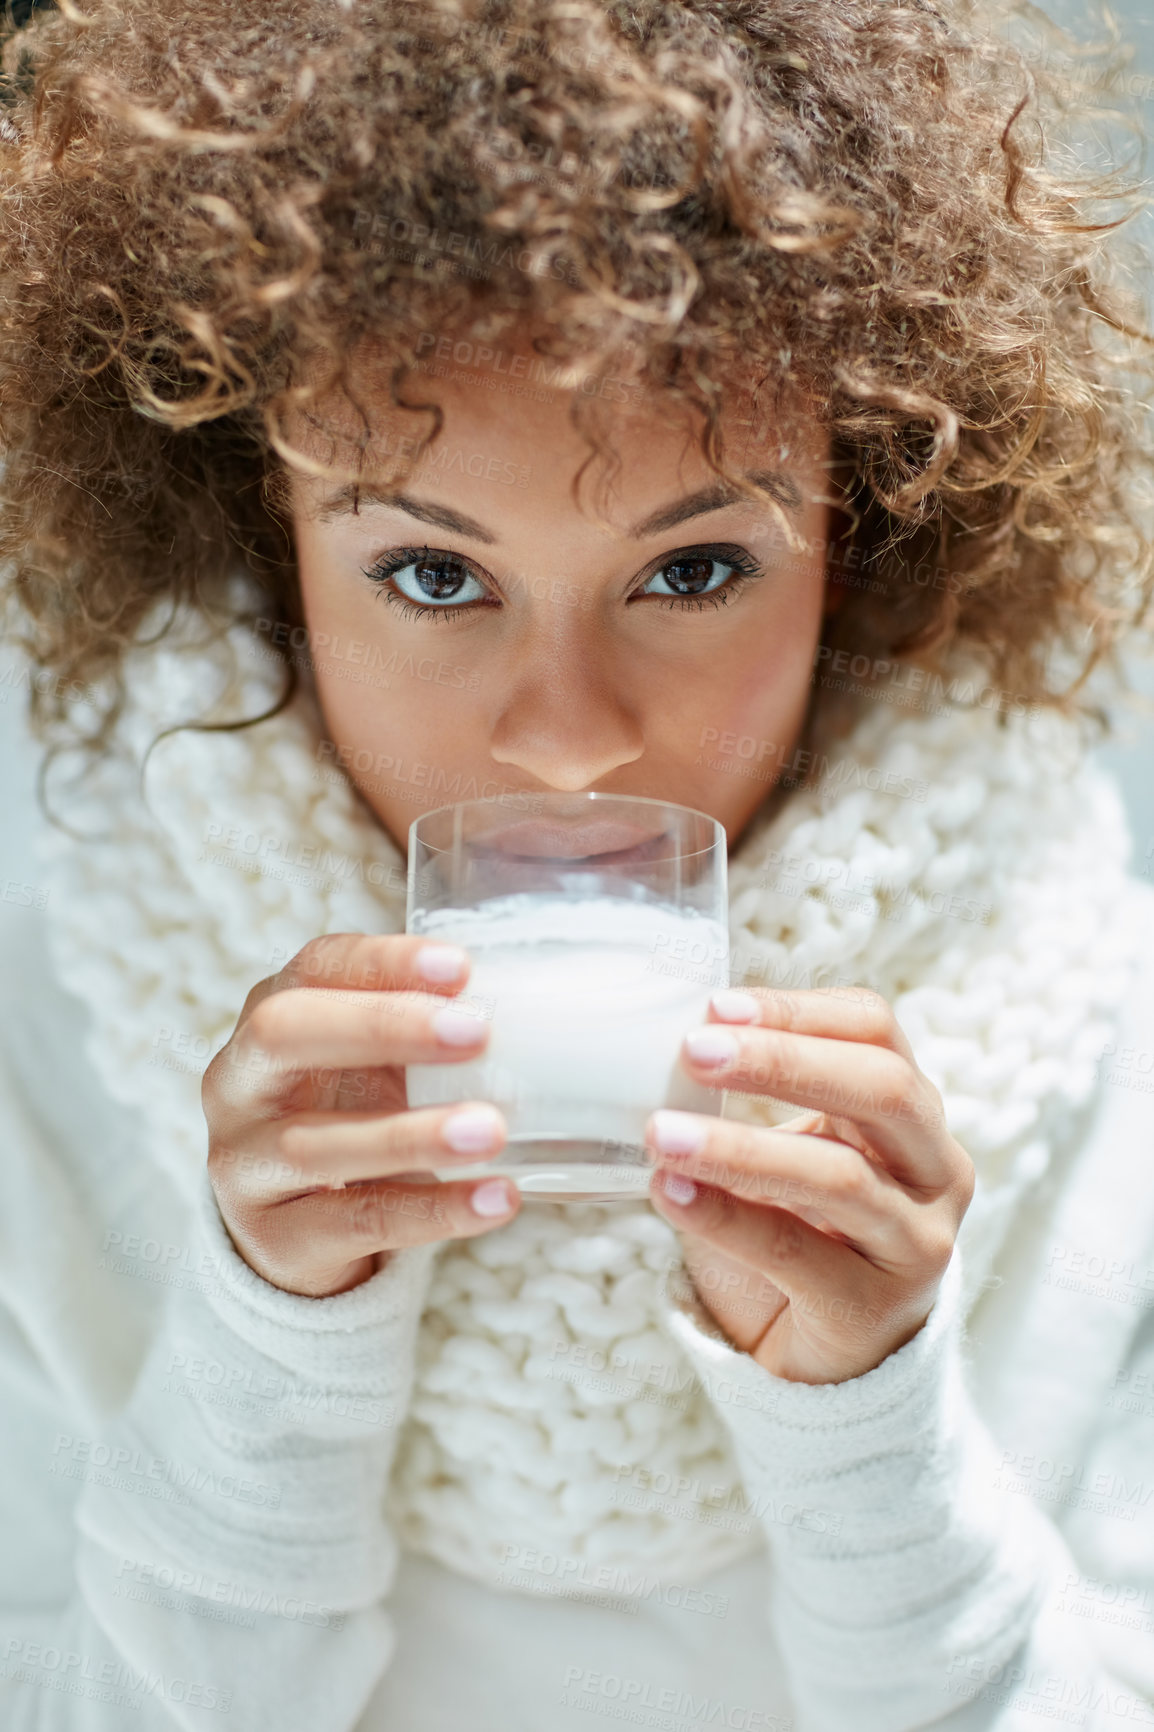 Buy stock photo Portrait of a young woman dressed in warm clothing drinking a glass of milk